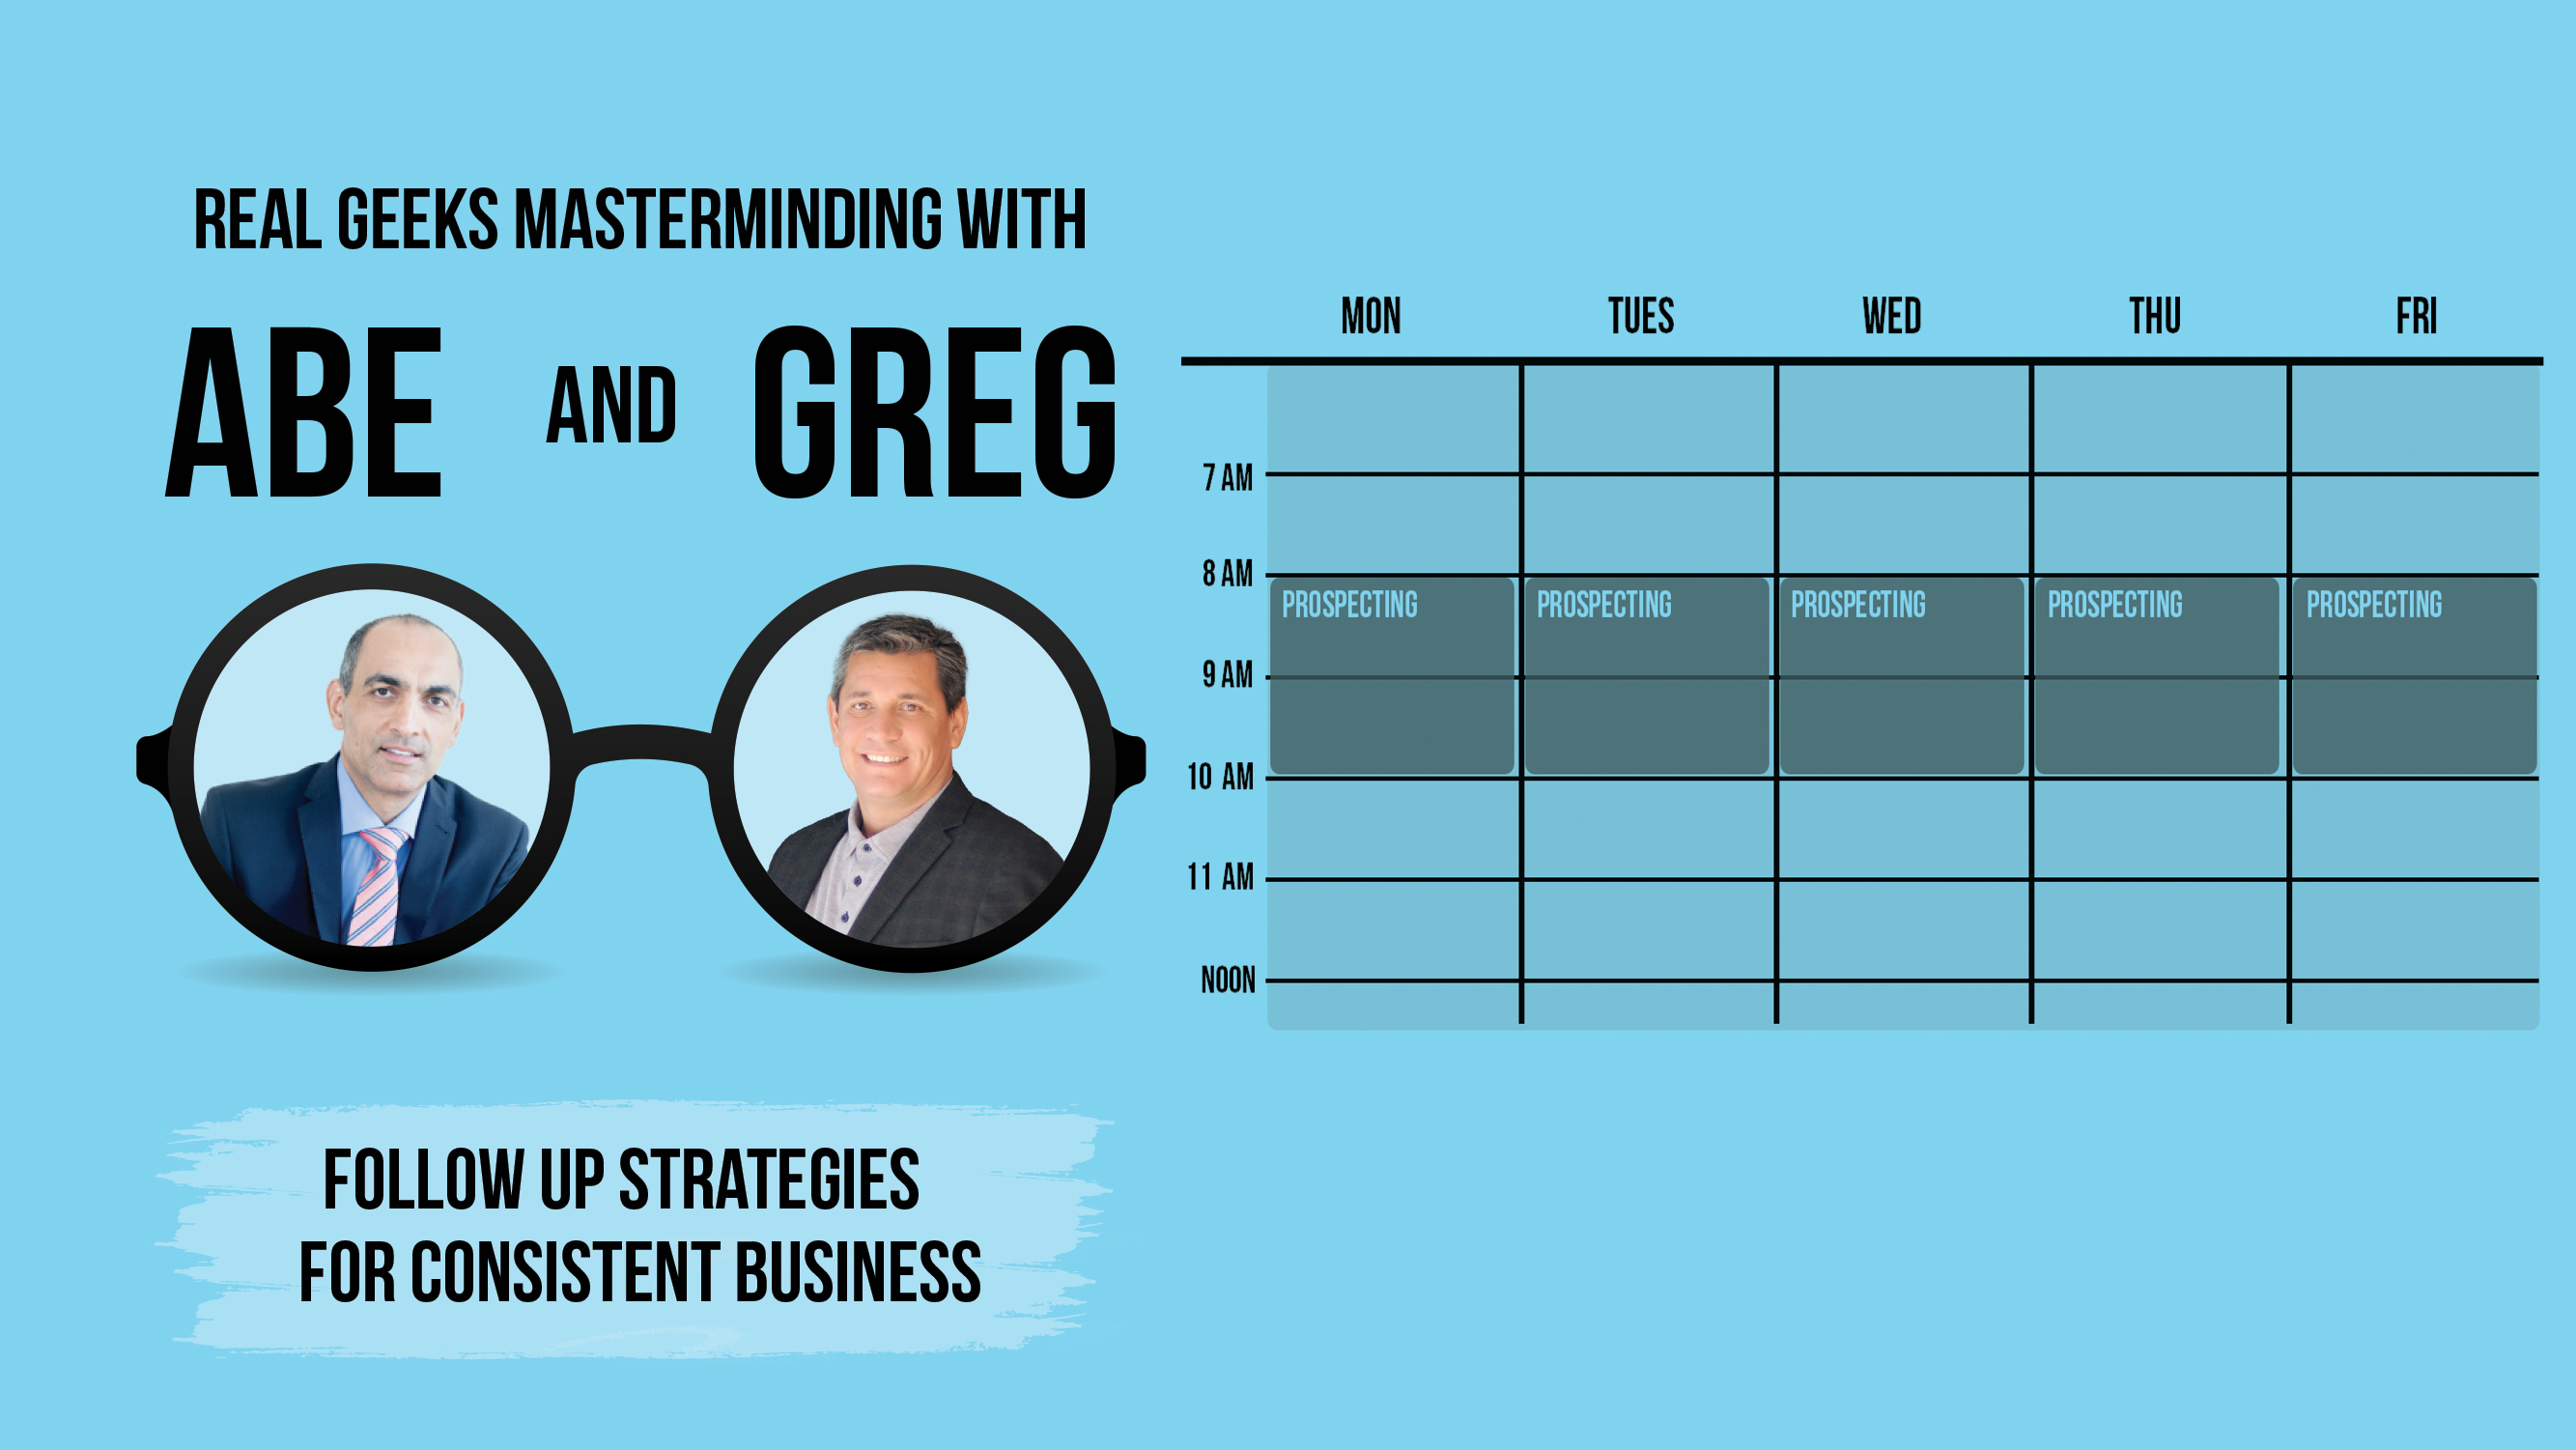 Follow-up Strategies for Consistent Business